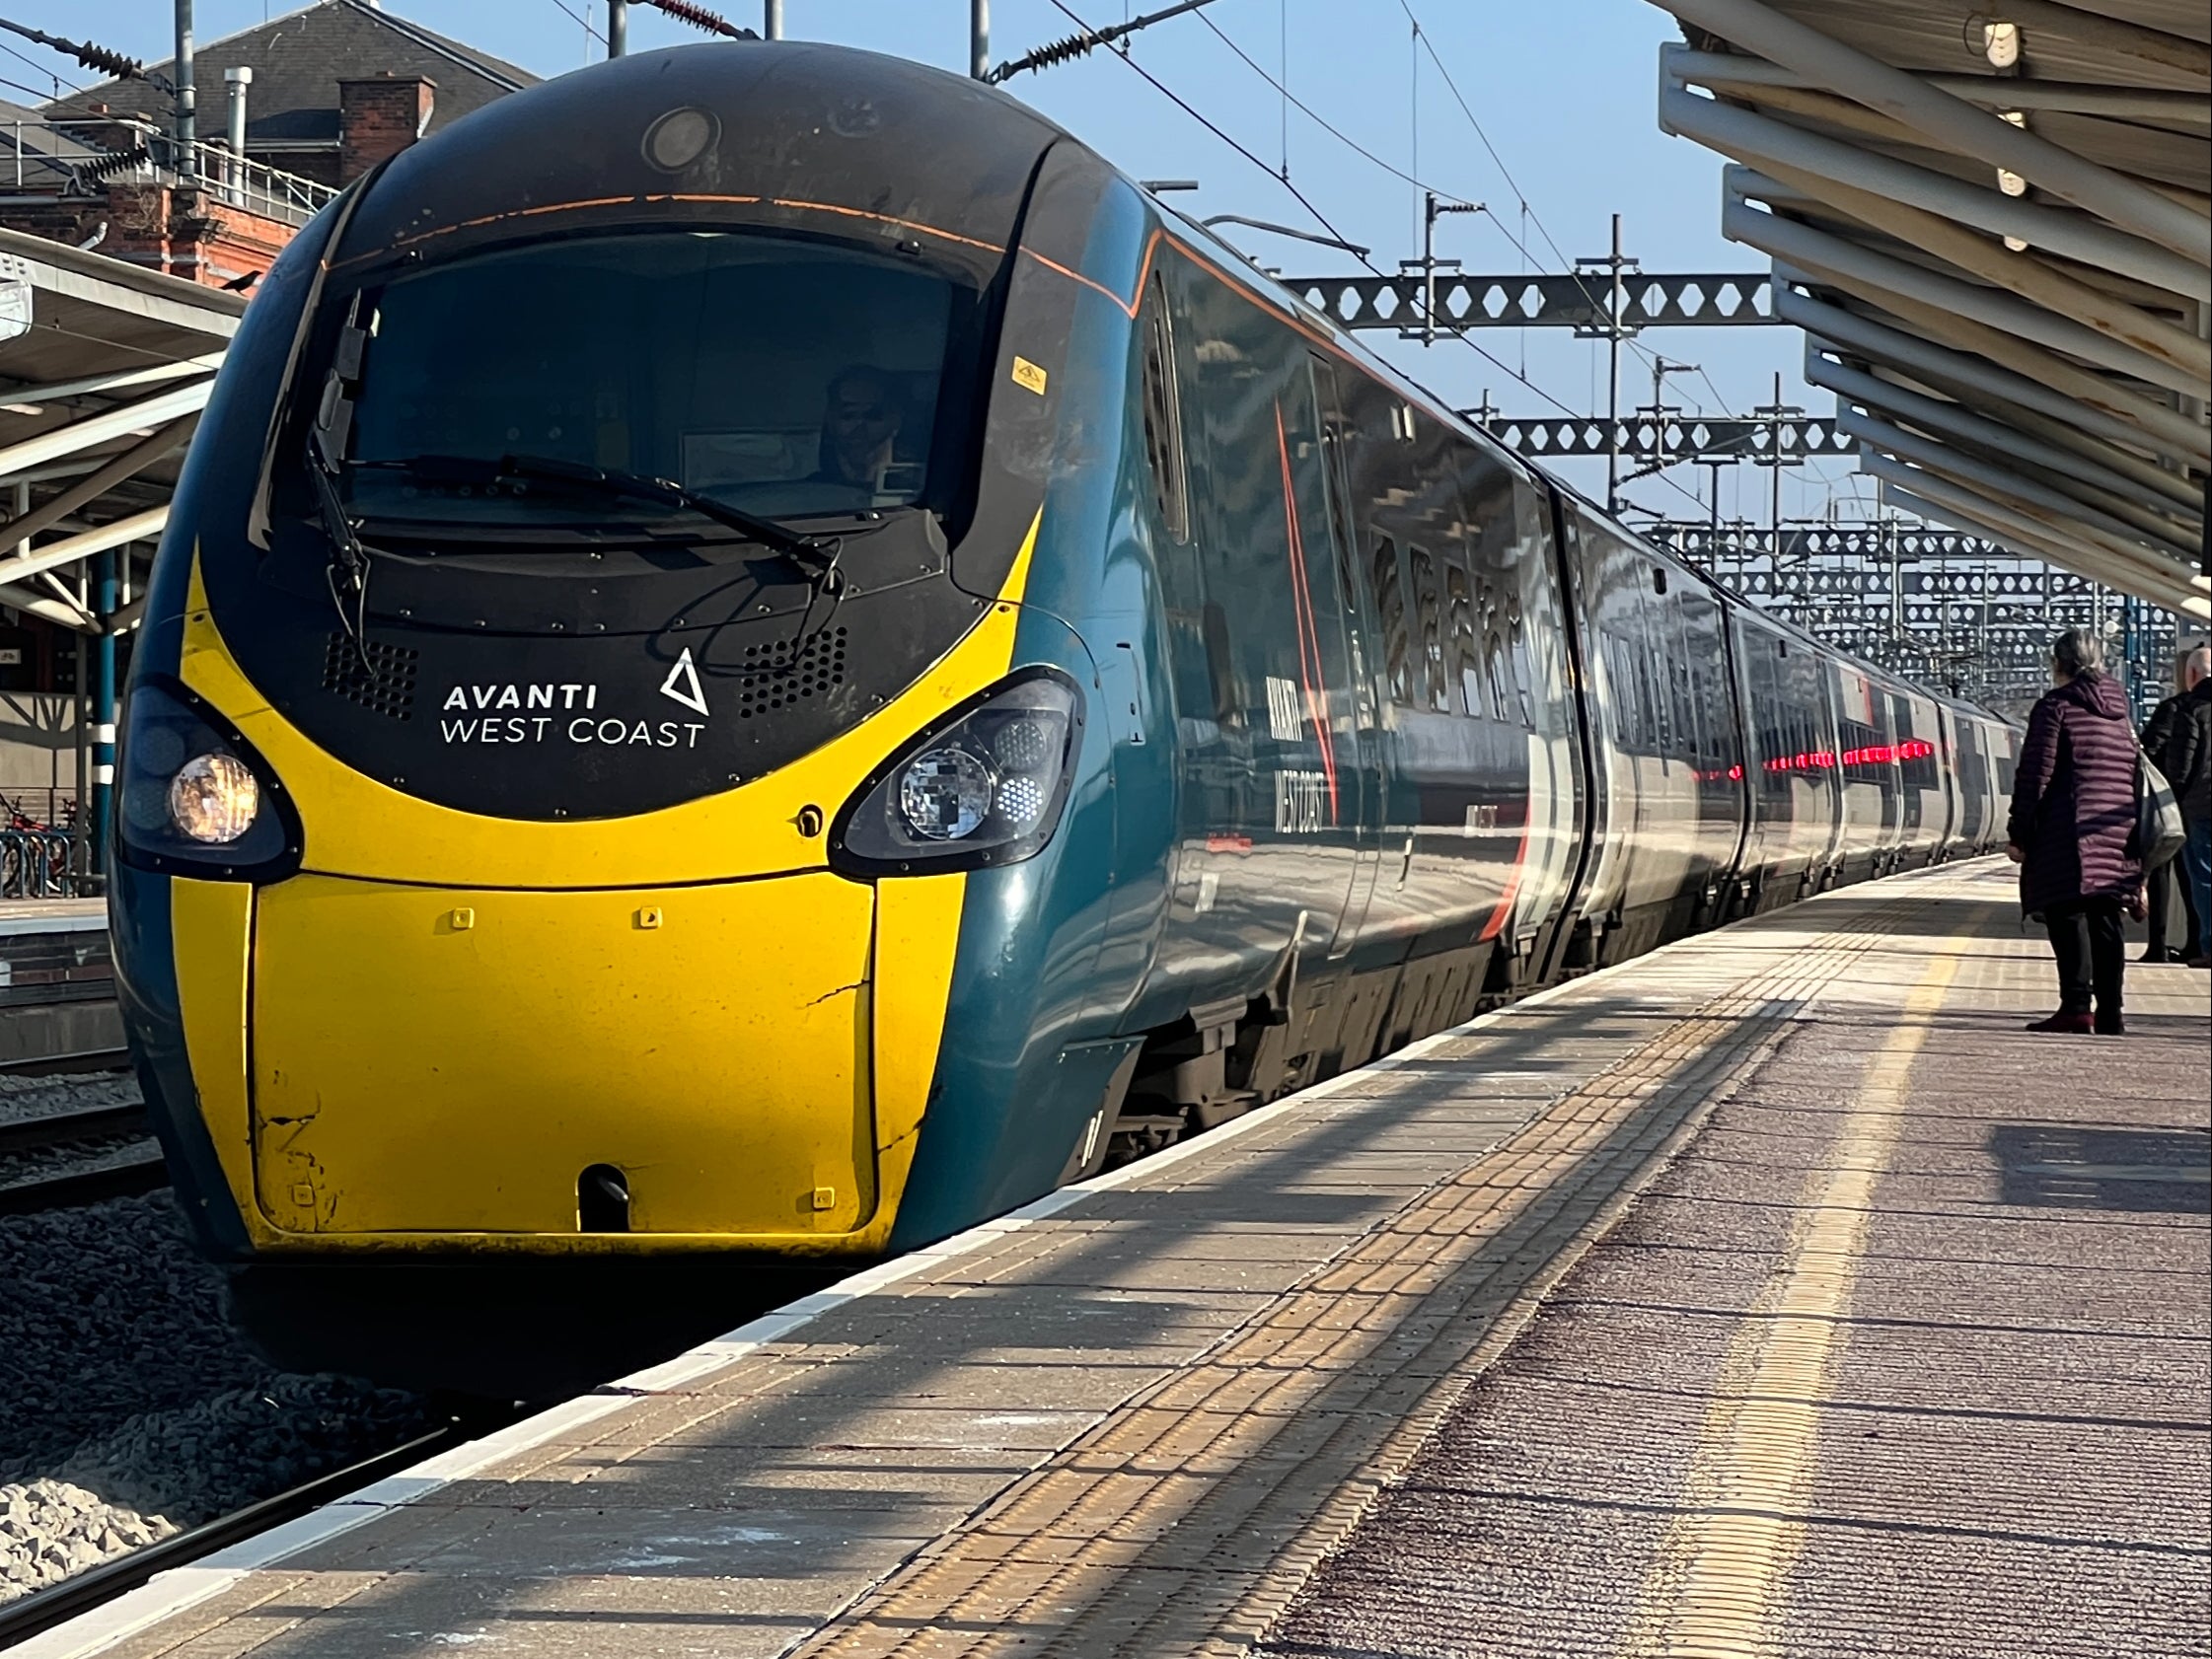 Arriving soon? Avanti West Coast train at Rugby station on the West Coast main line